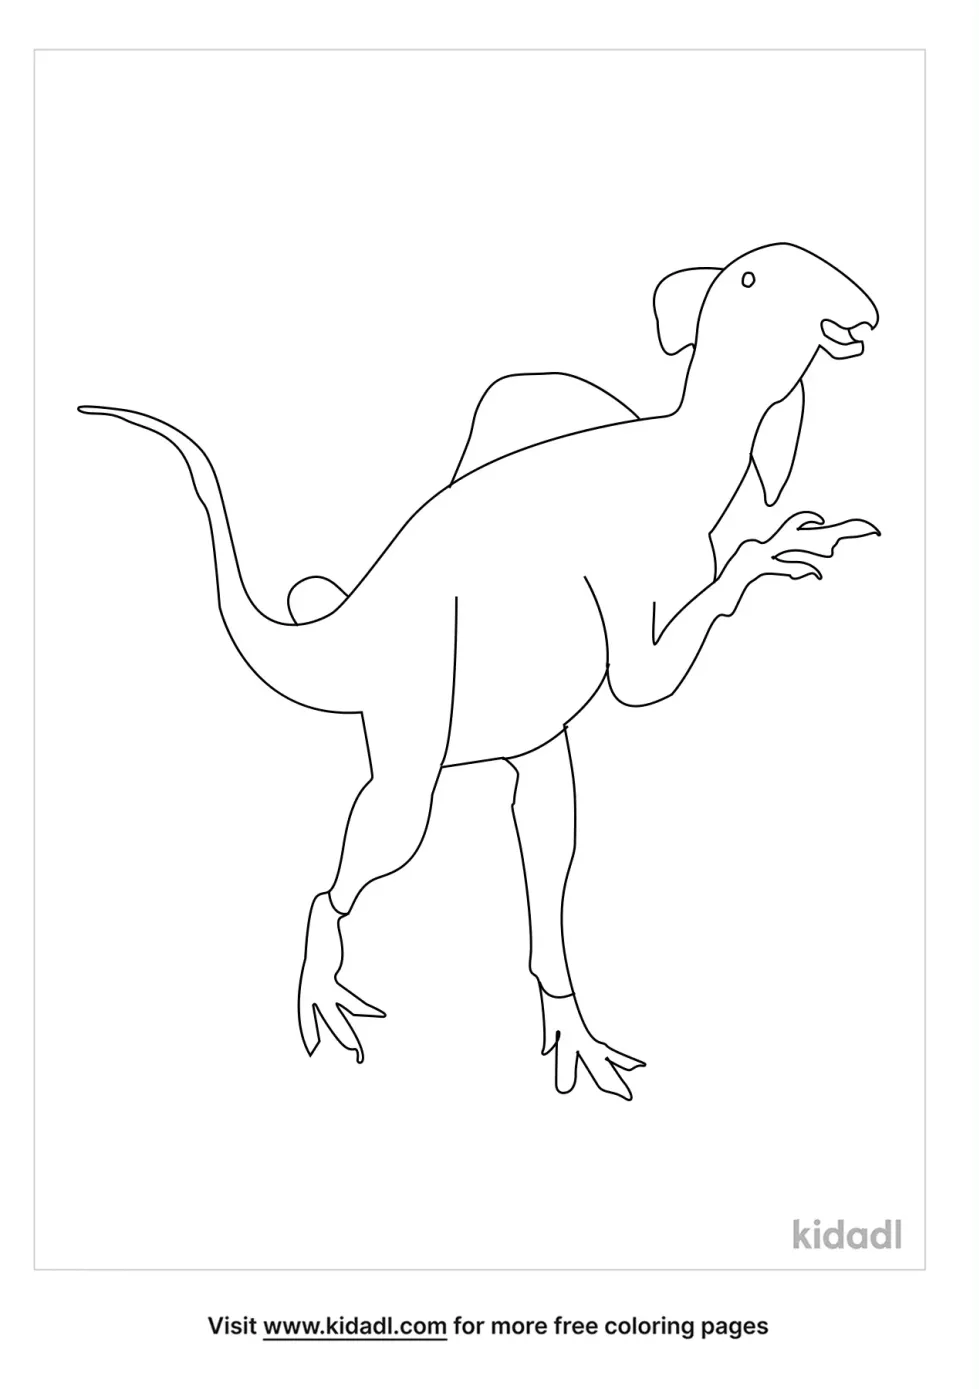 Beipiaosaurus Coloring Page